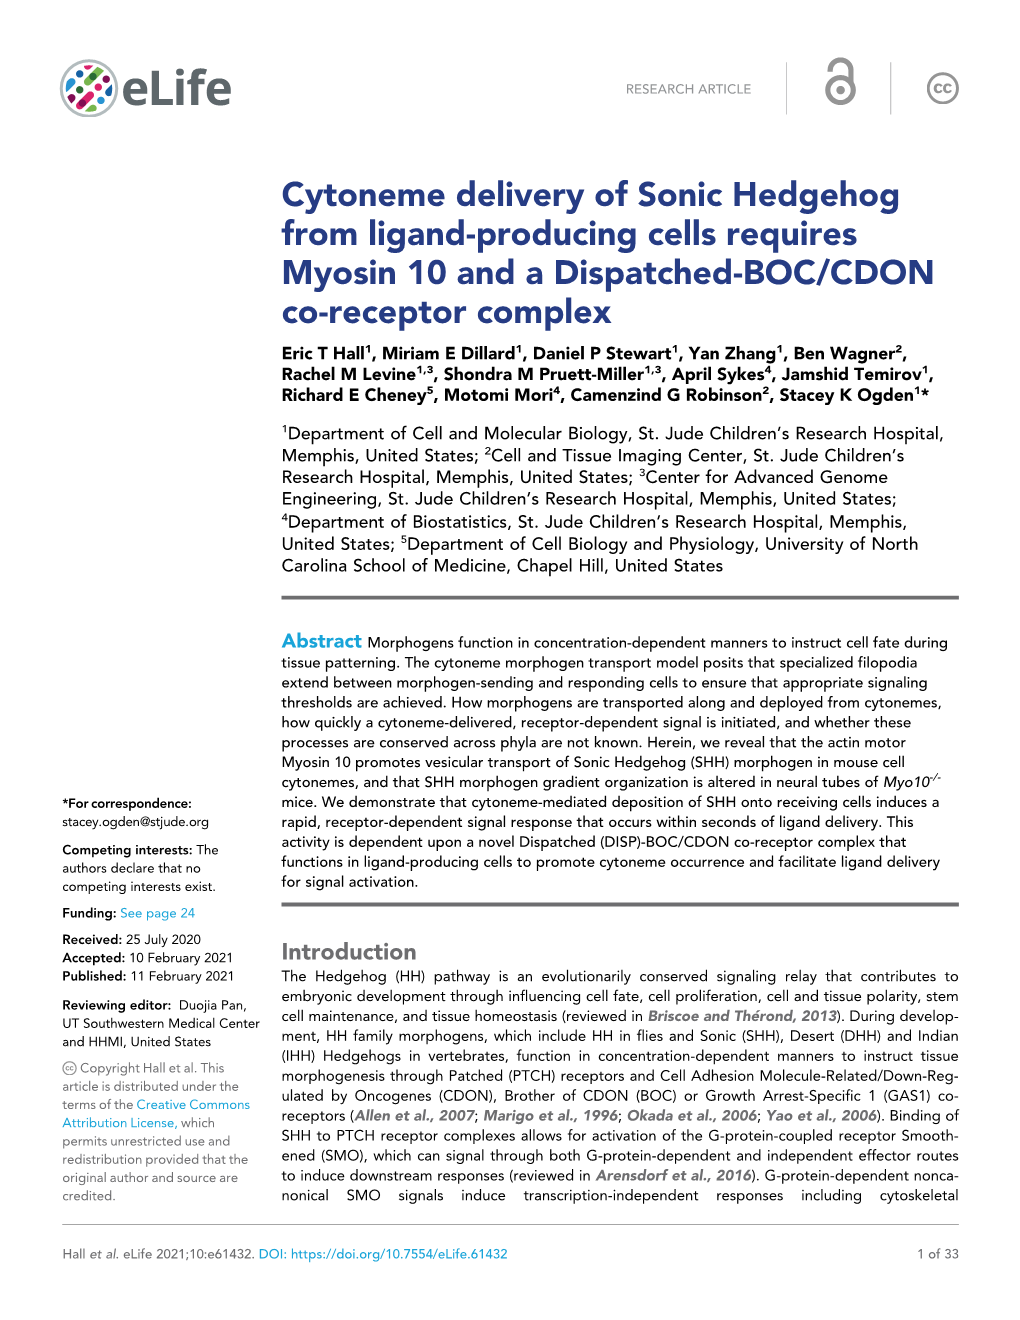 Cytoneme Delivery of Sonic Hedgehog from Ligand-Producing